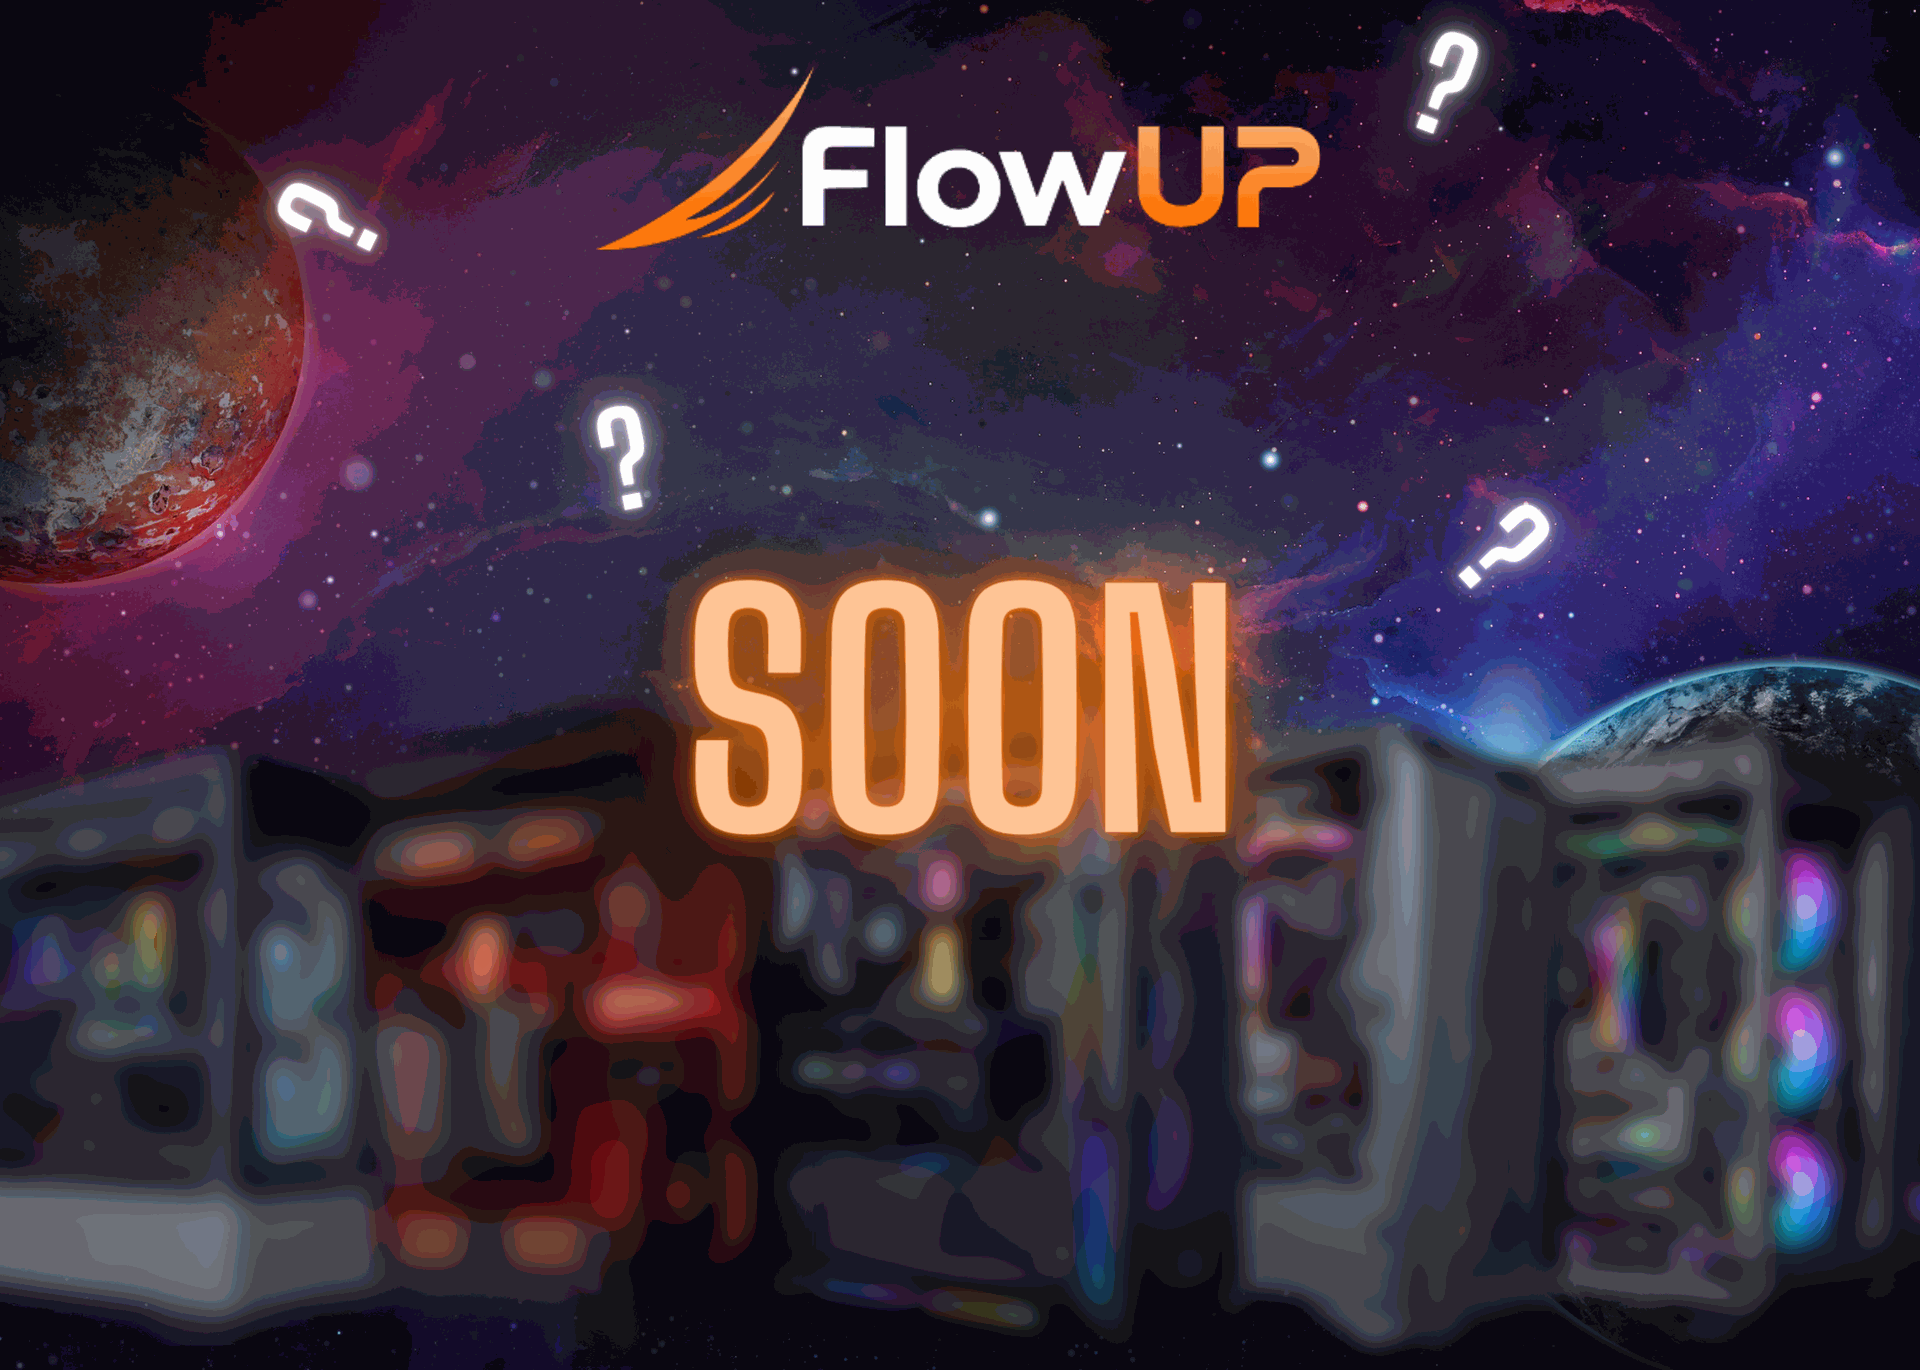 flowup mystery